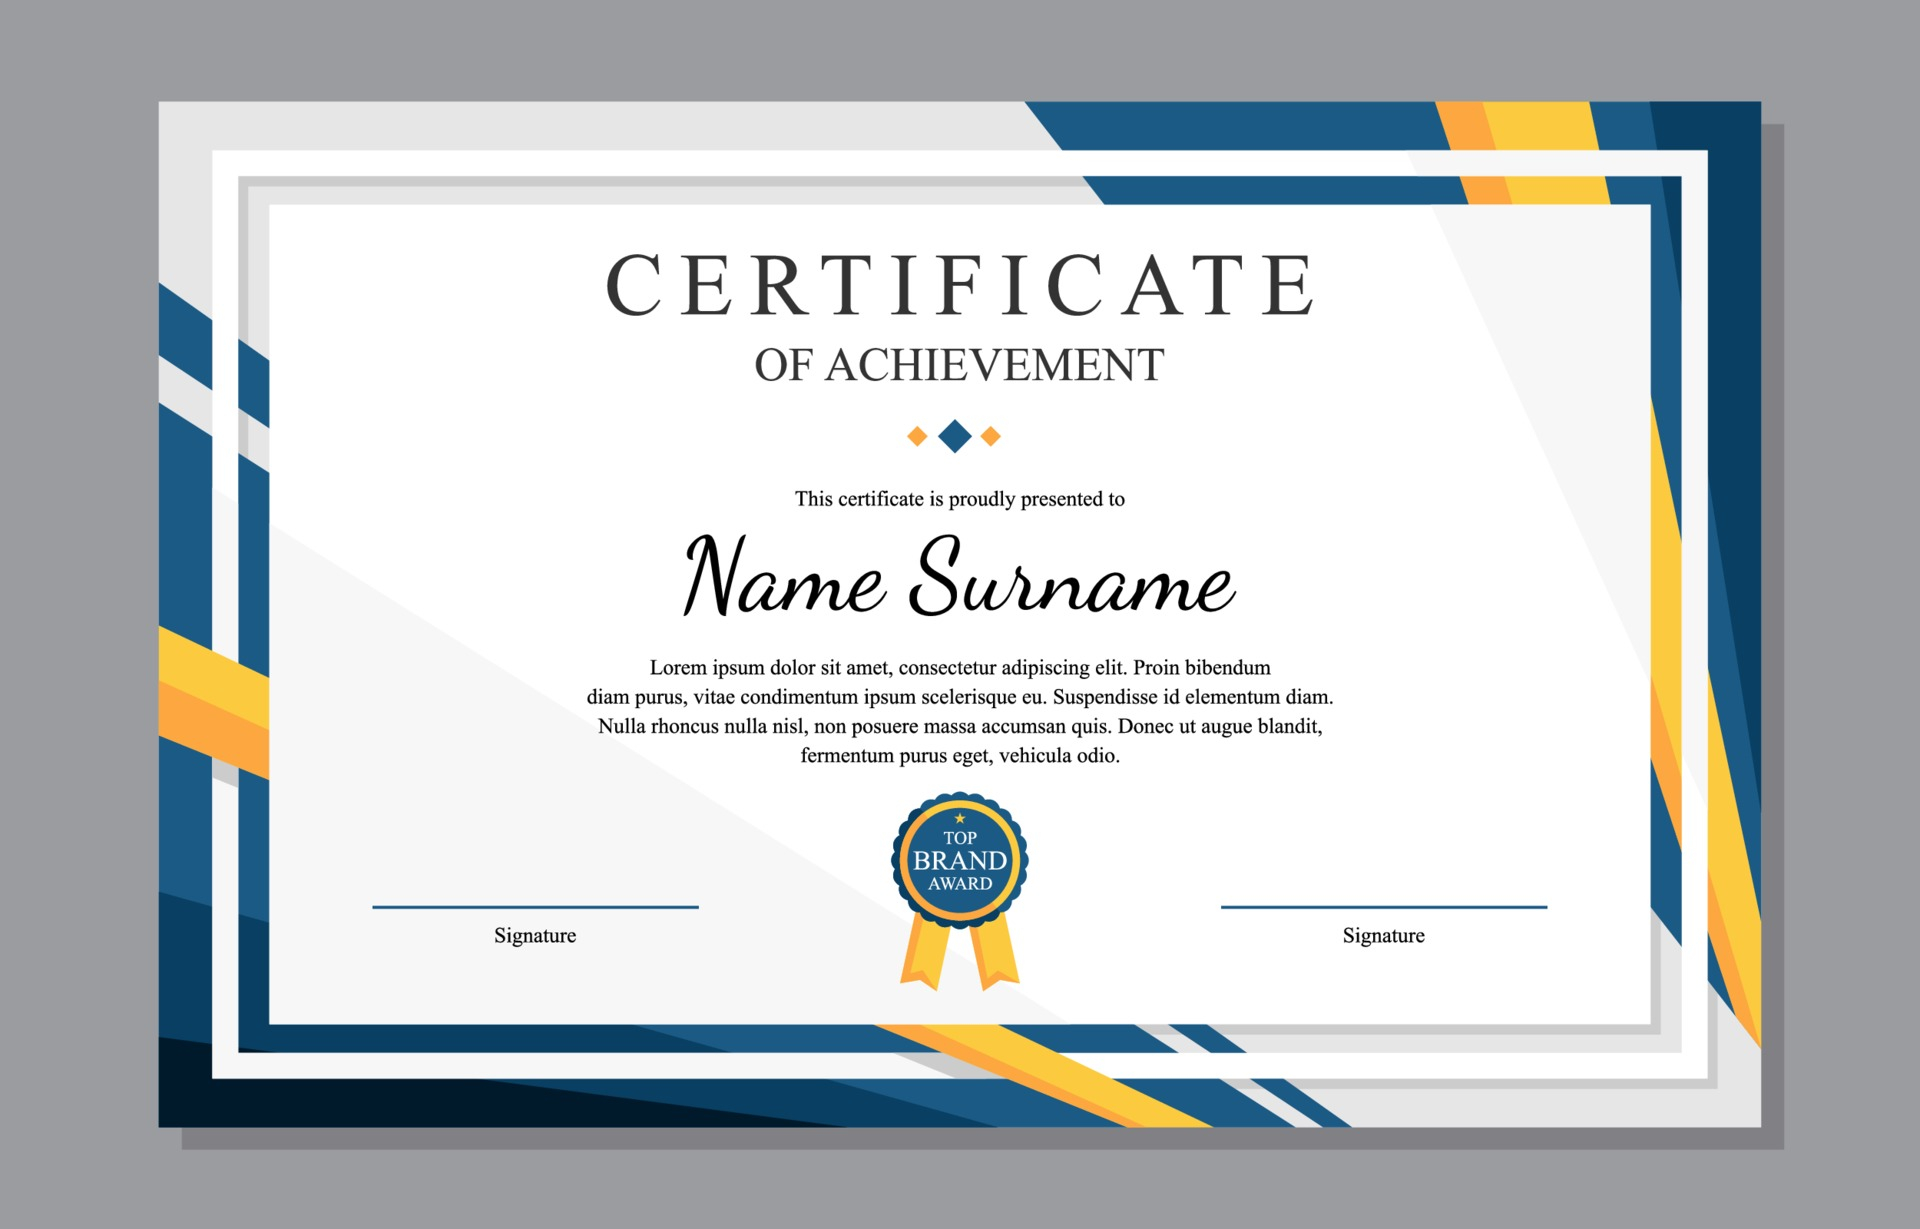 Certificate Templates, Free Certificate Designs Intended For Update Certificates That Use Certificate Templates